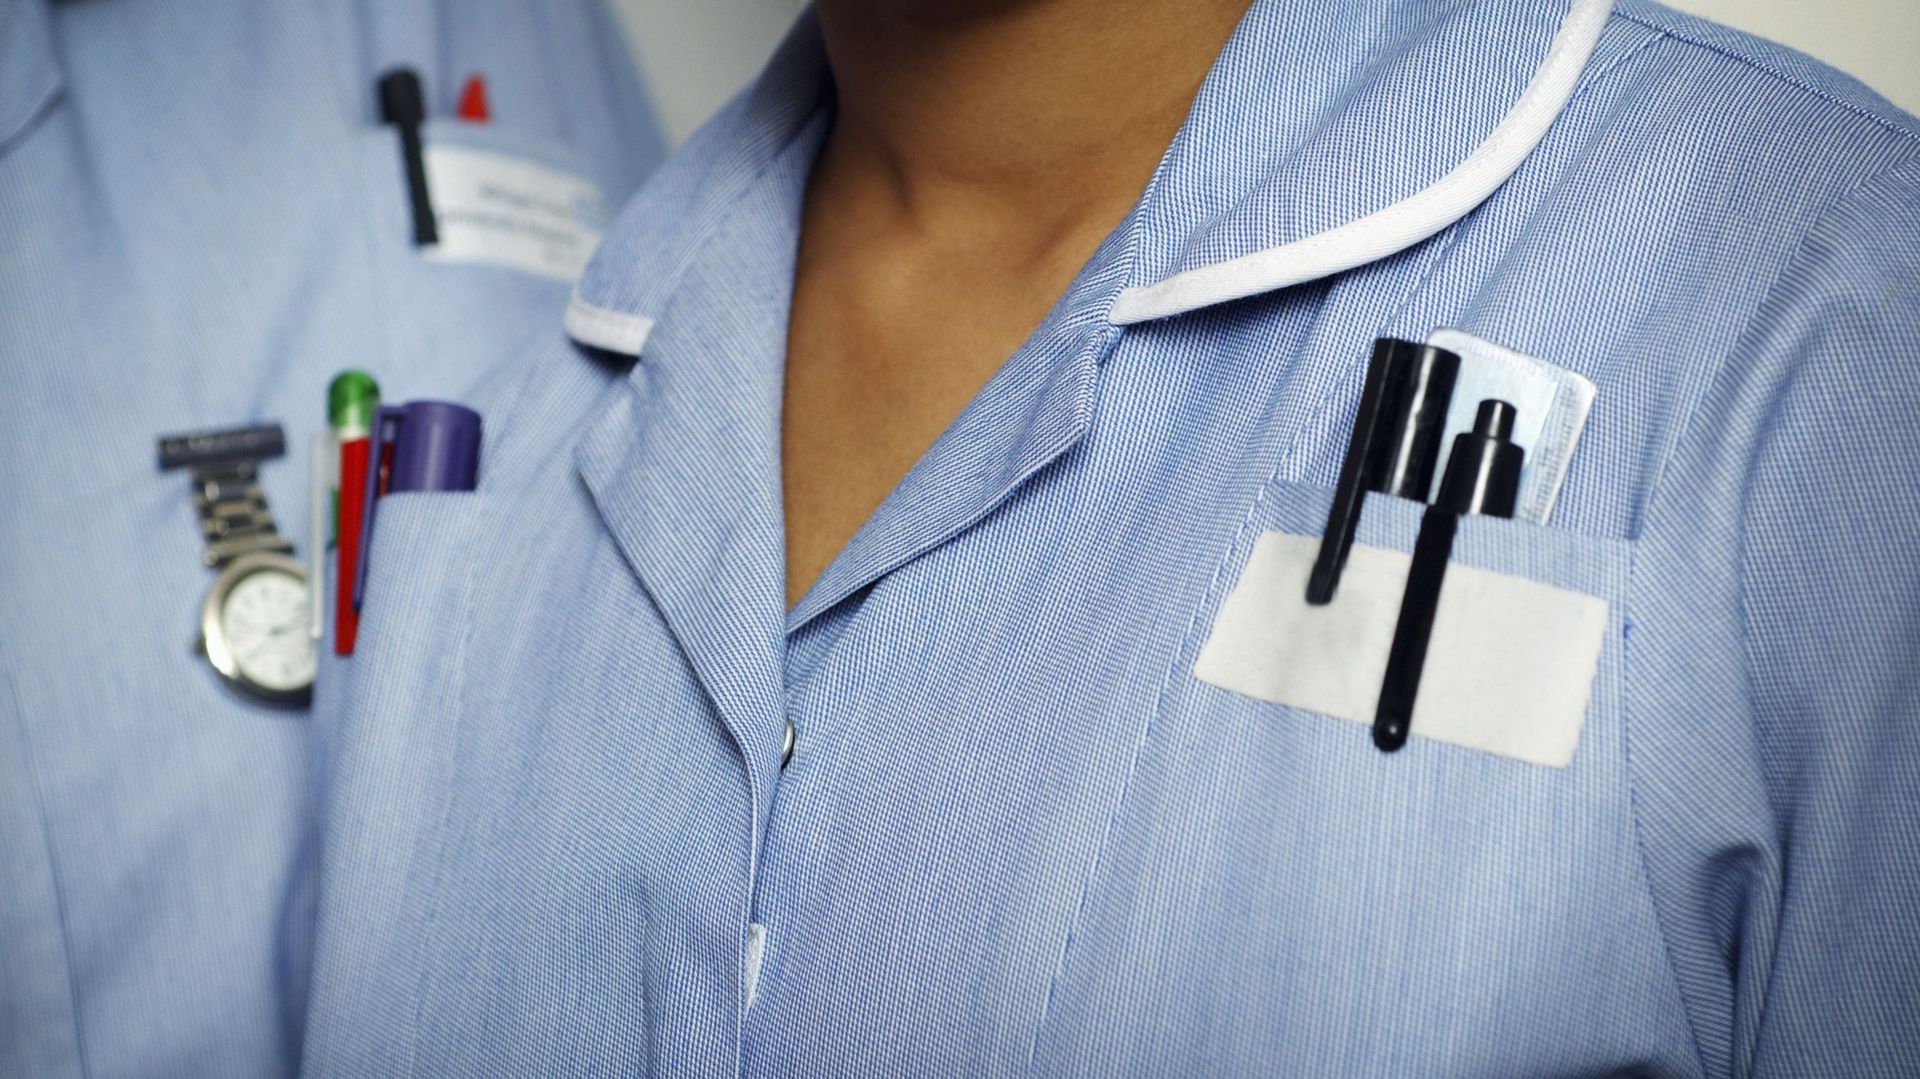 UK, Close-up of two typically dressed NHS (National Health Service) nurses